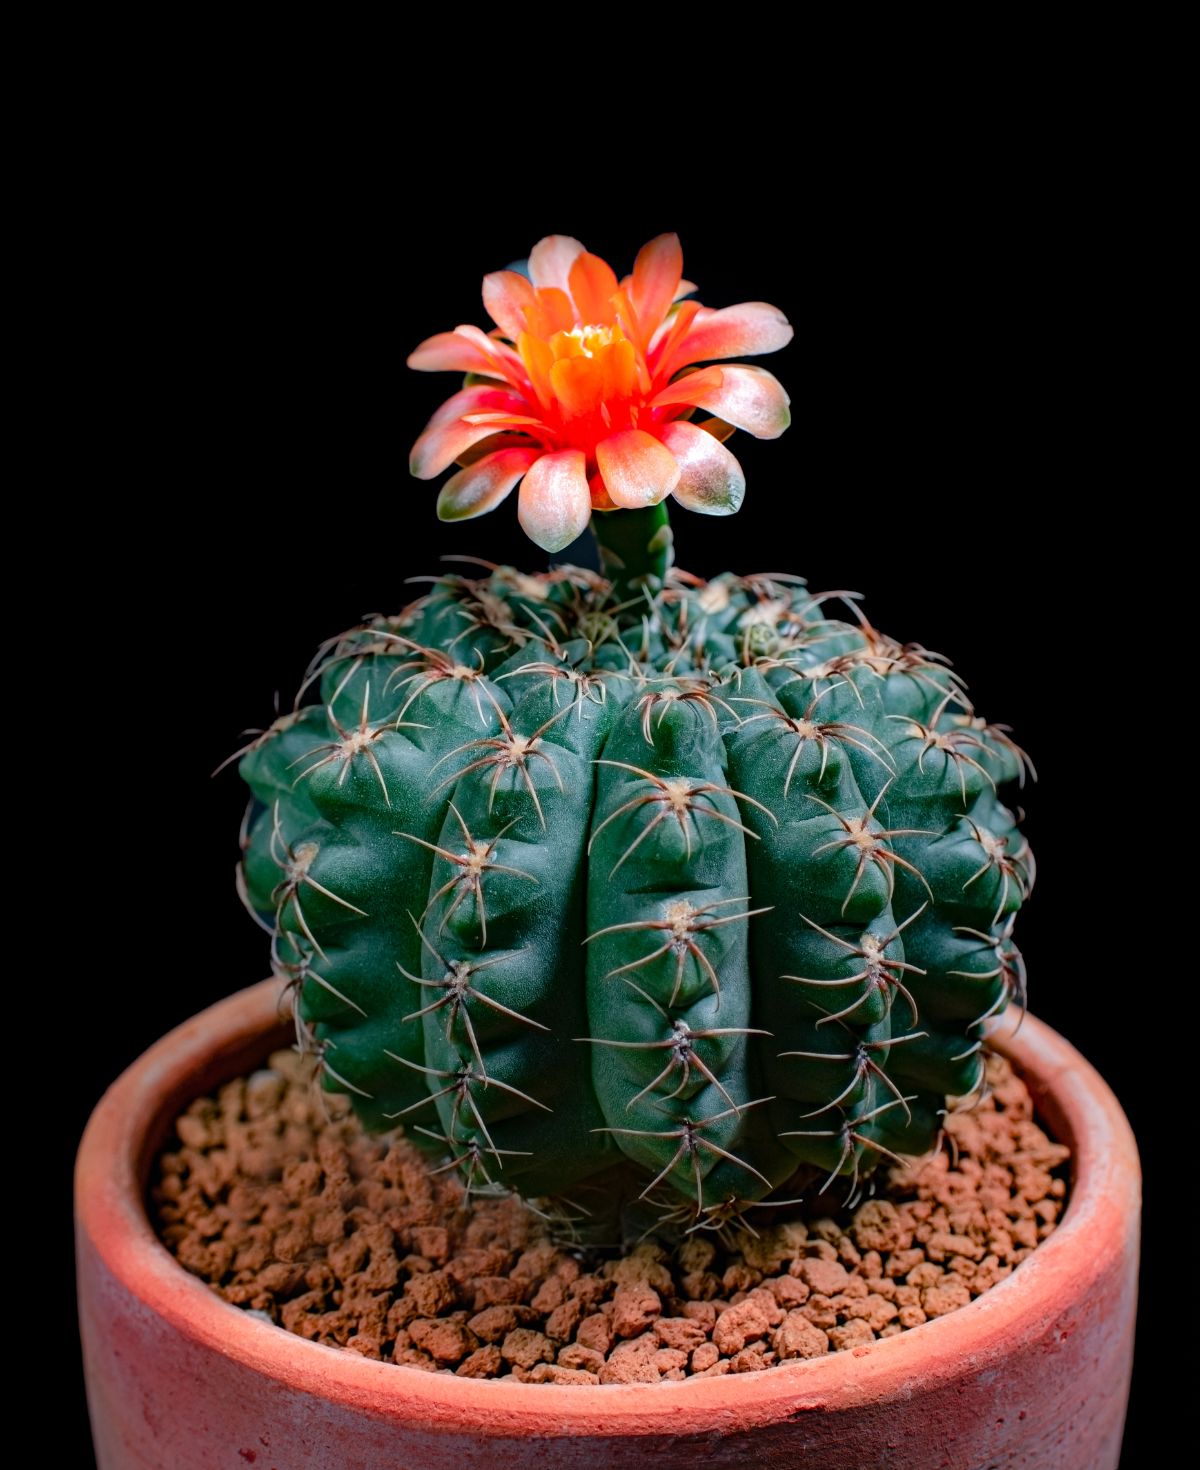 Dwarf Chin Cactus with a red flower in a pot.